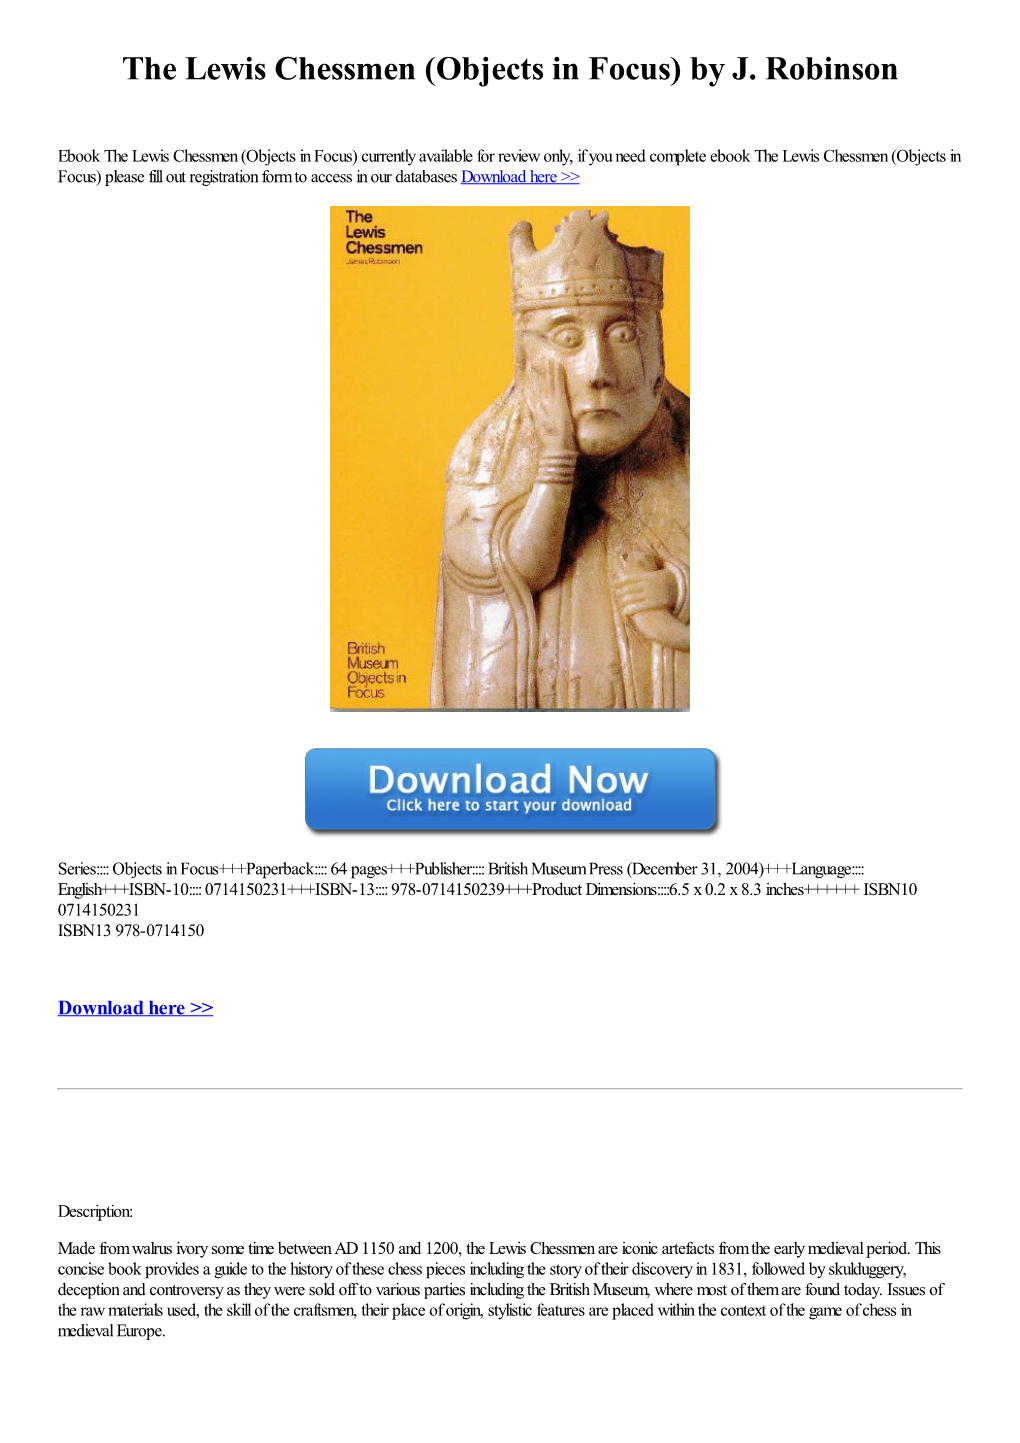 The Lewis Chessmen (Objects in Focus) by J